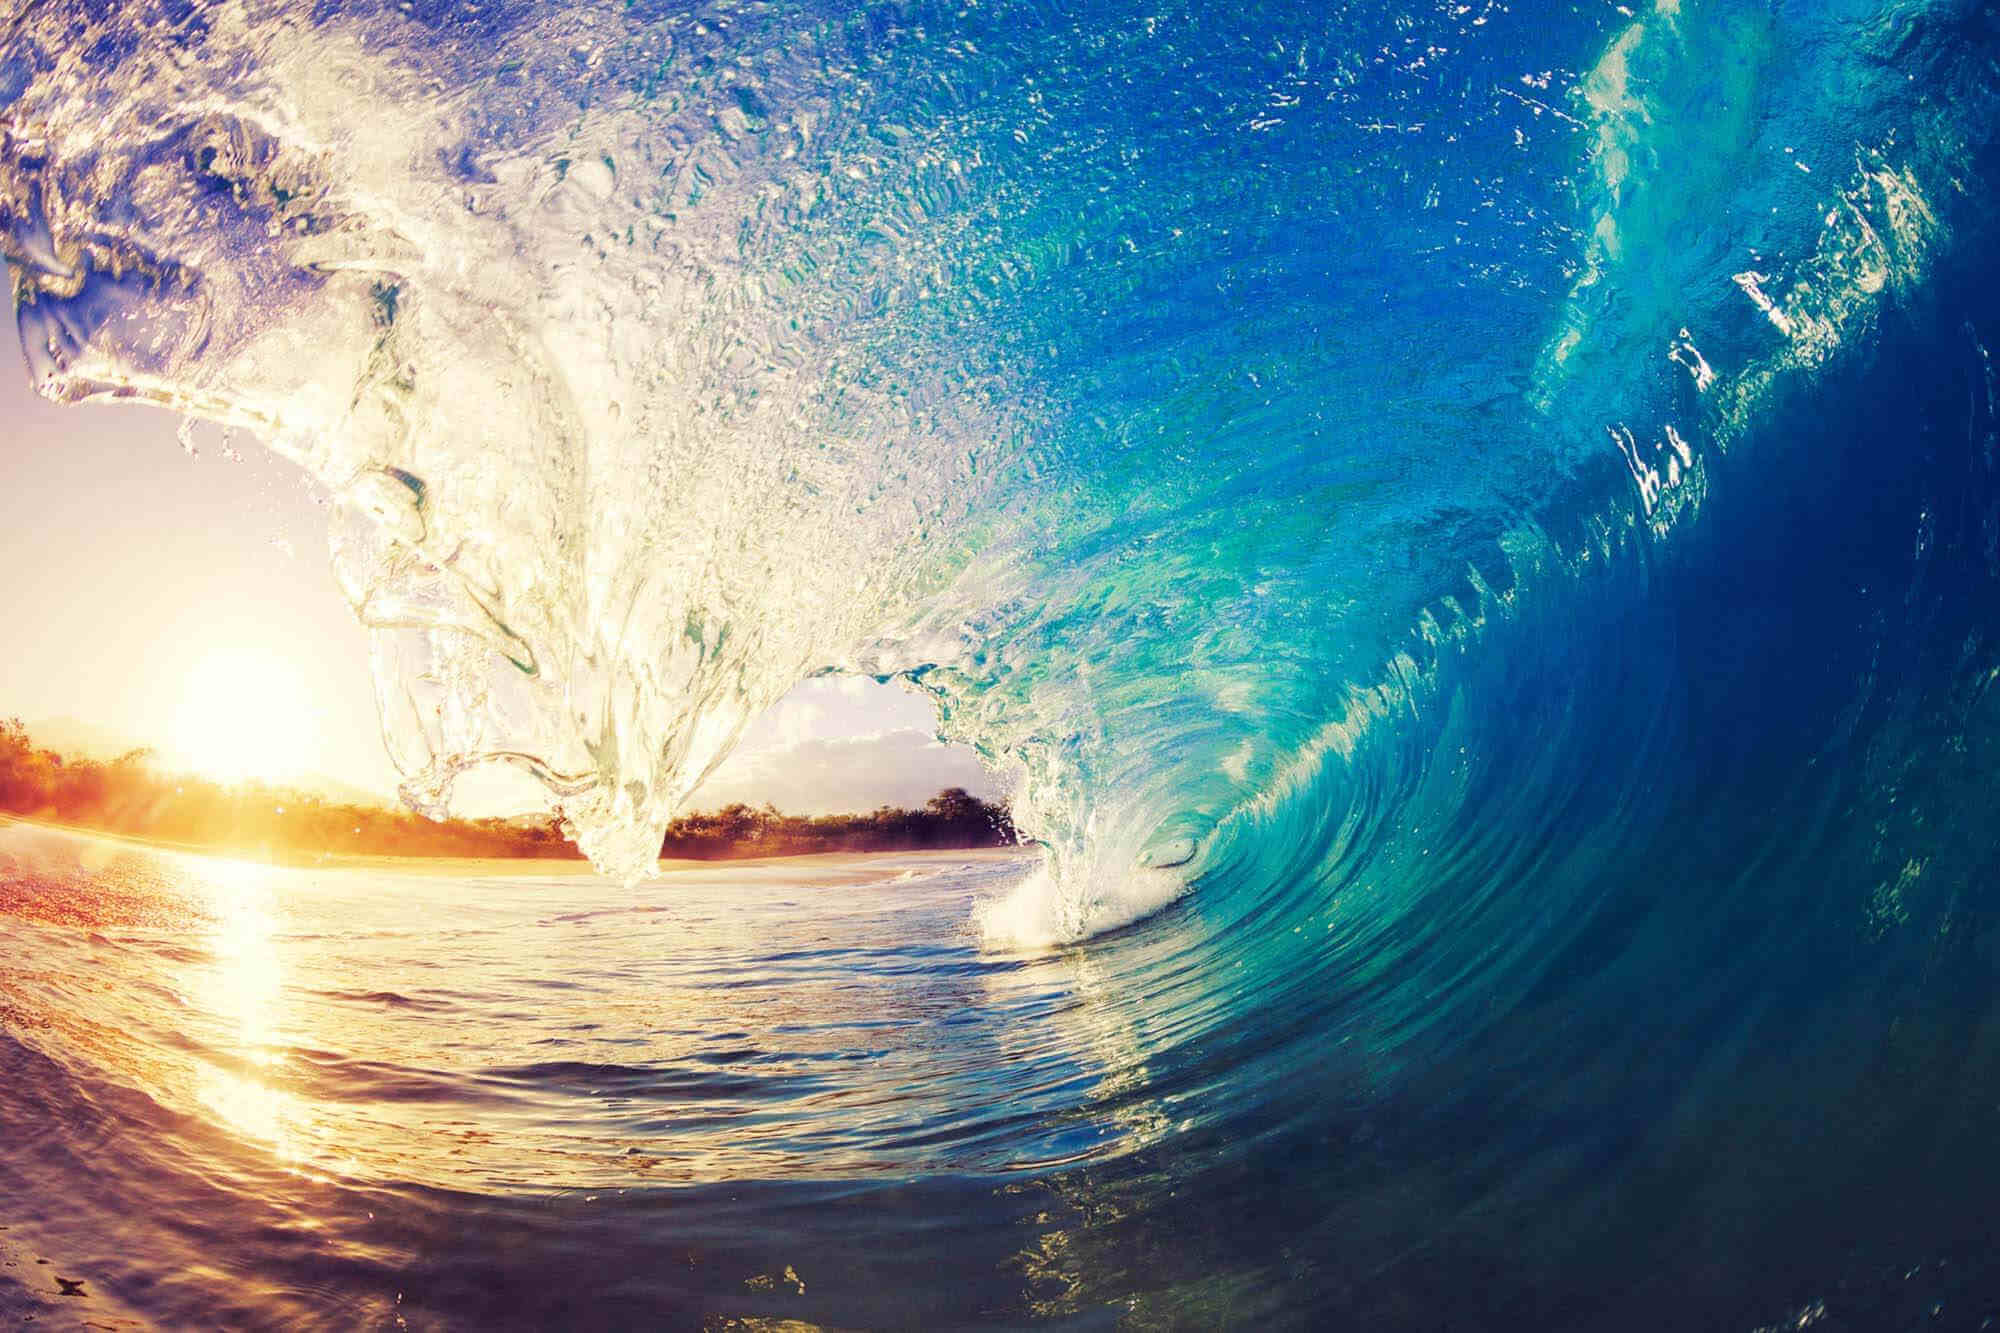 View from inside a cresting wave, facing a sunset